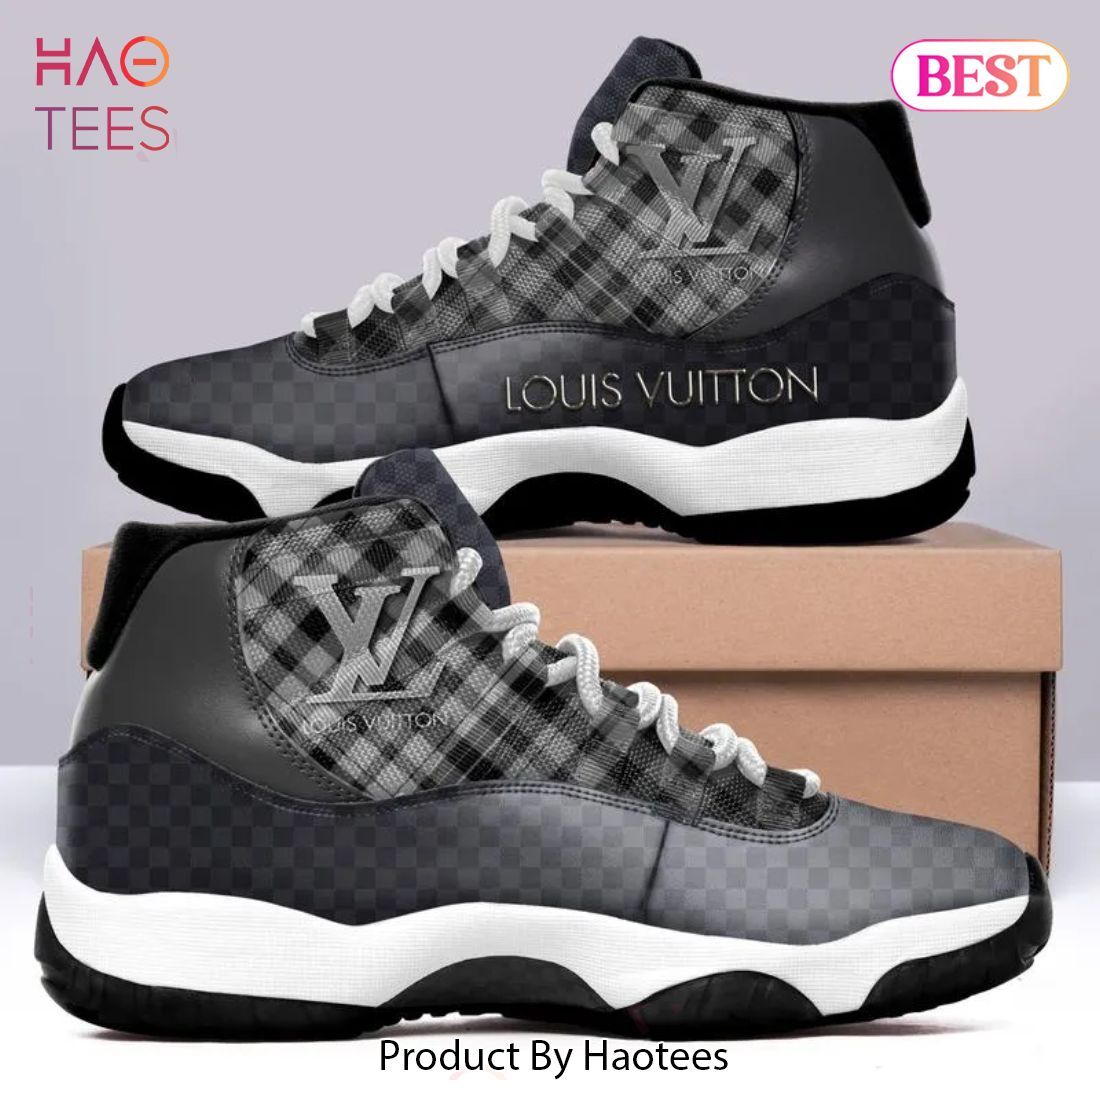 NEW FASHION] Louis Vuitton Black Grey Air Jordan 11 Sneakers Shoes Hot 2023  LV Gifts For